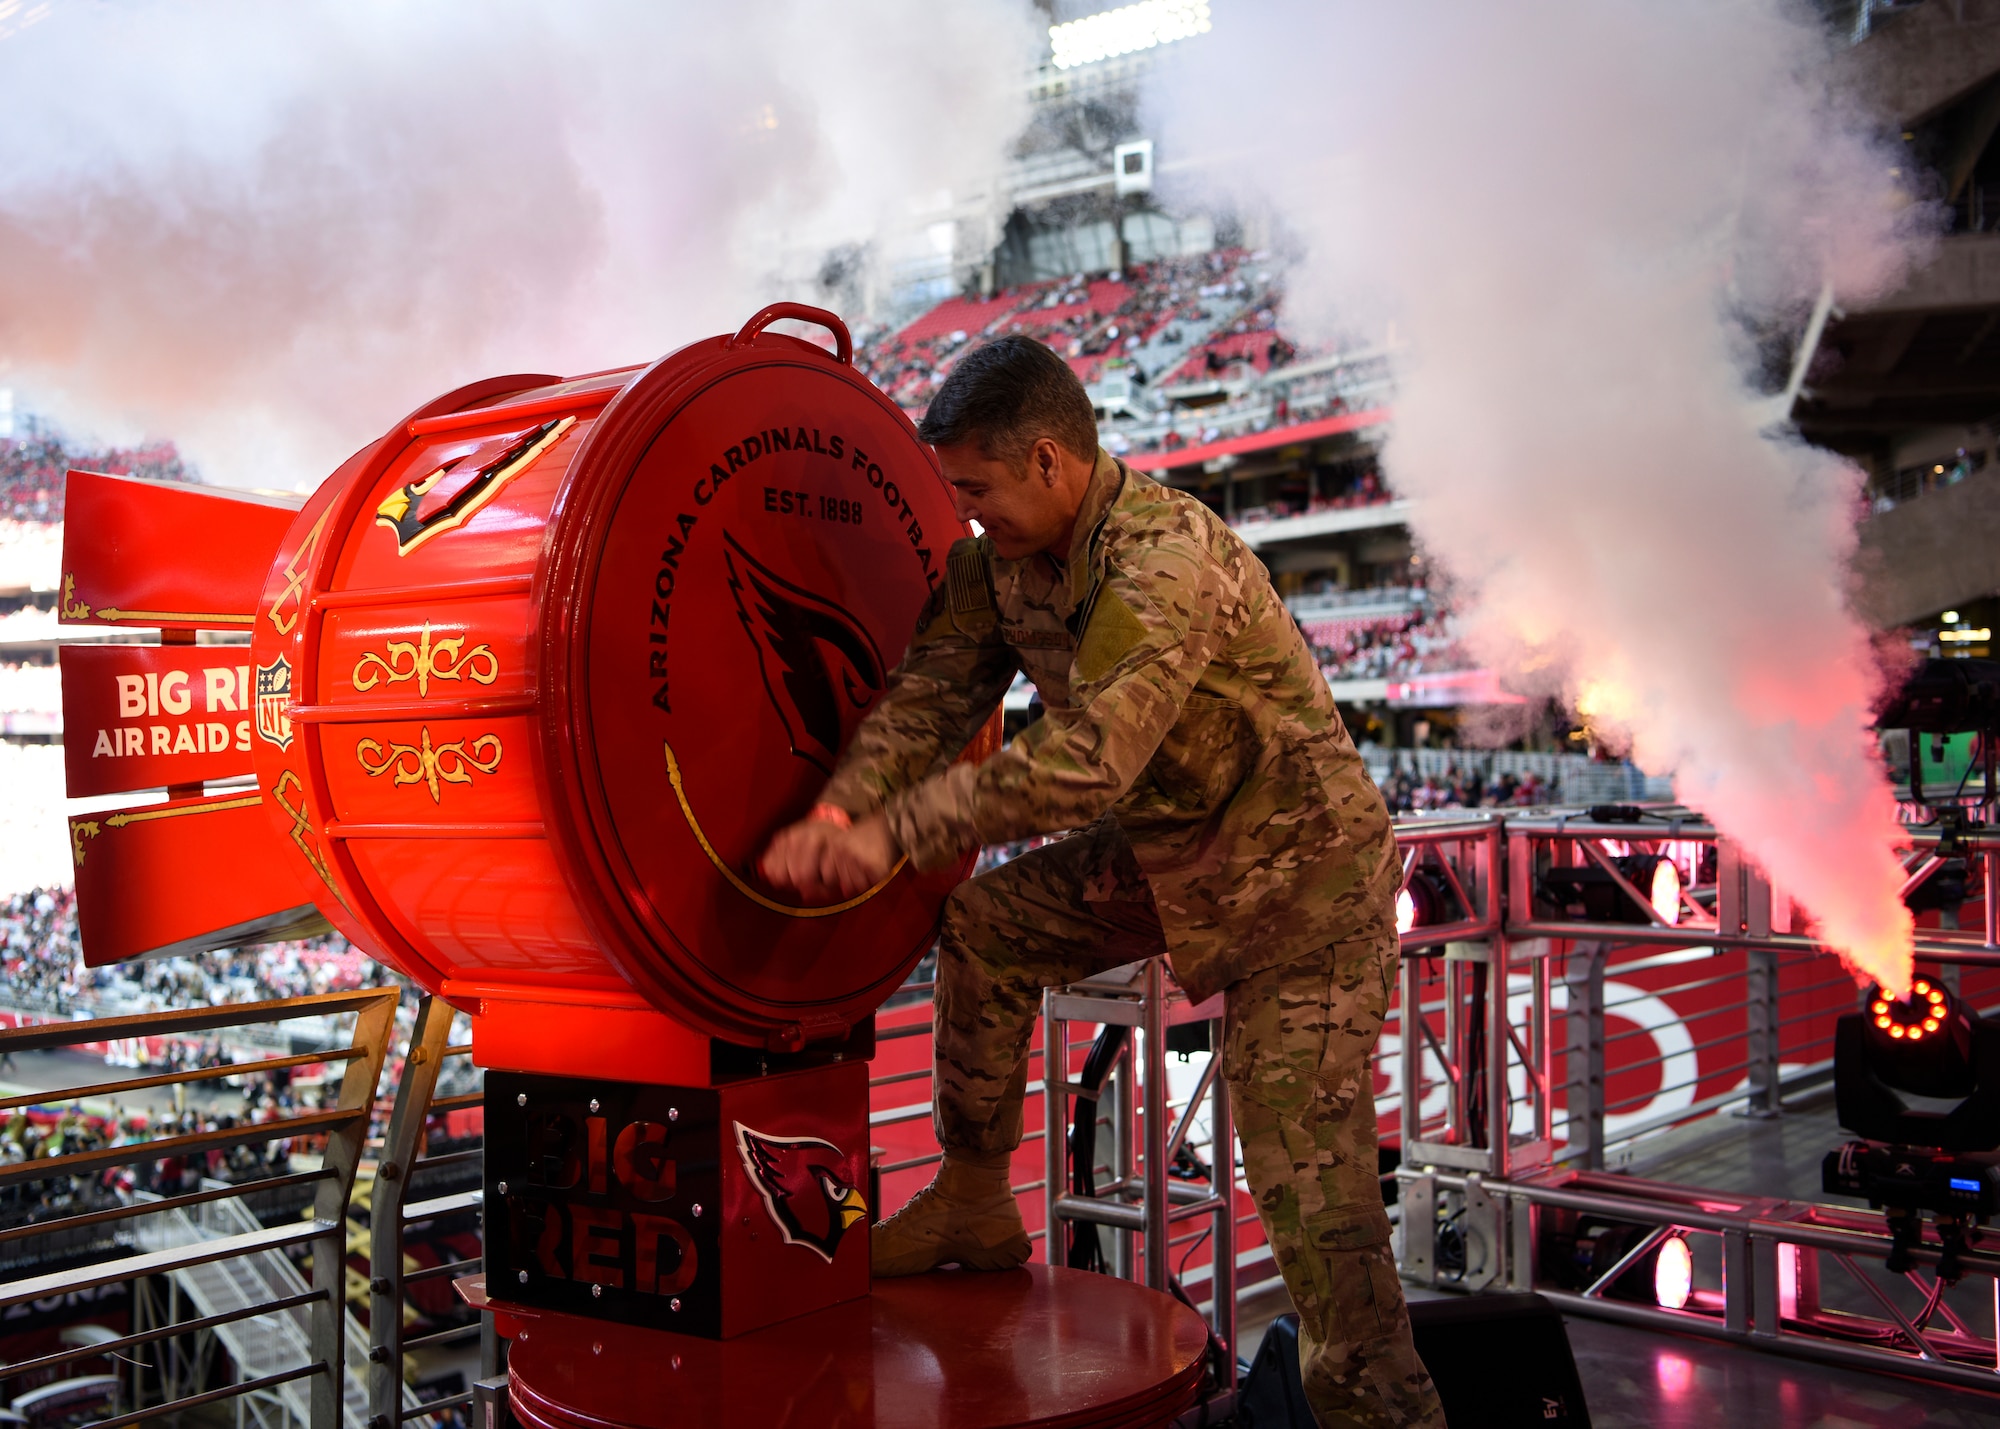 Chief Master Sgt. Ronald Thompson, 56th Fighter Wing command chief, cranks the “Big Red” air raid siren before the Arizona Cardinals Salute to Service game, Nov. 18, 2018, at State Farm Stadium, Glendale, Ariz.